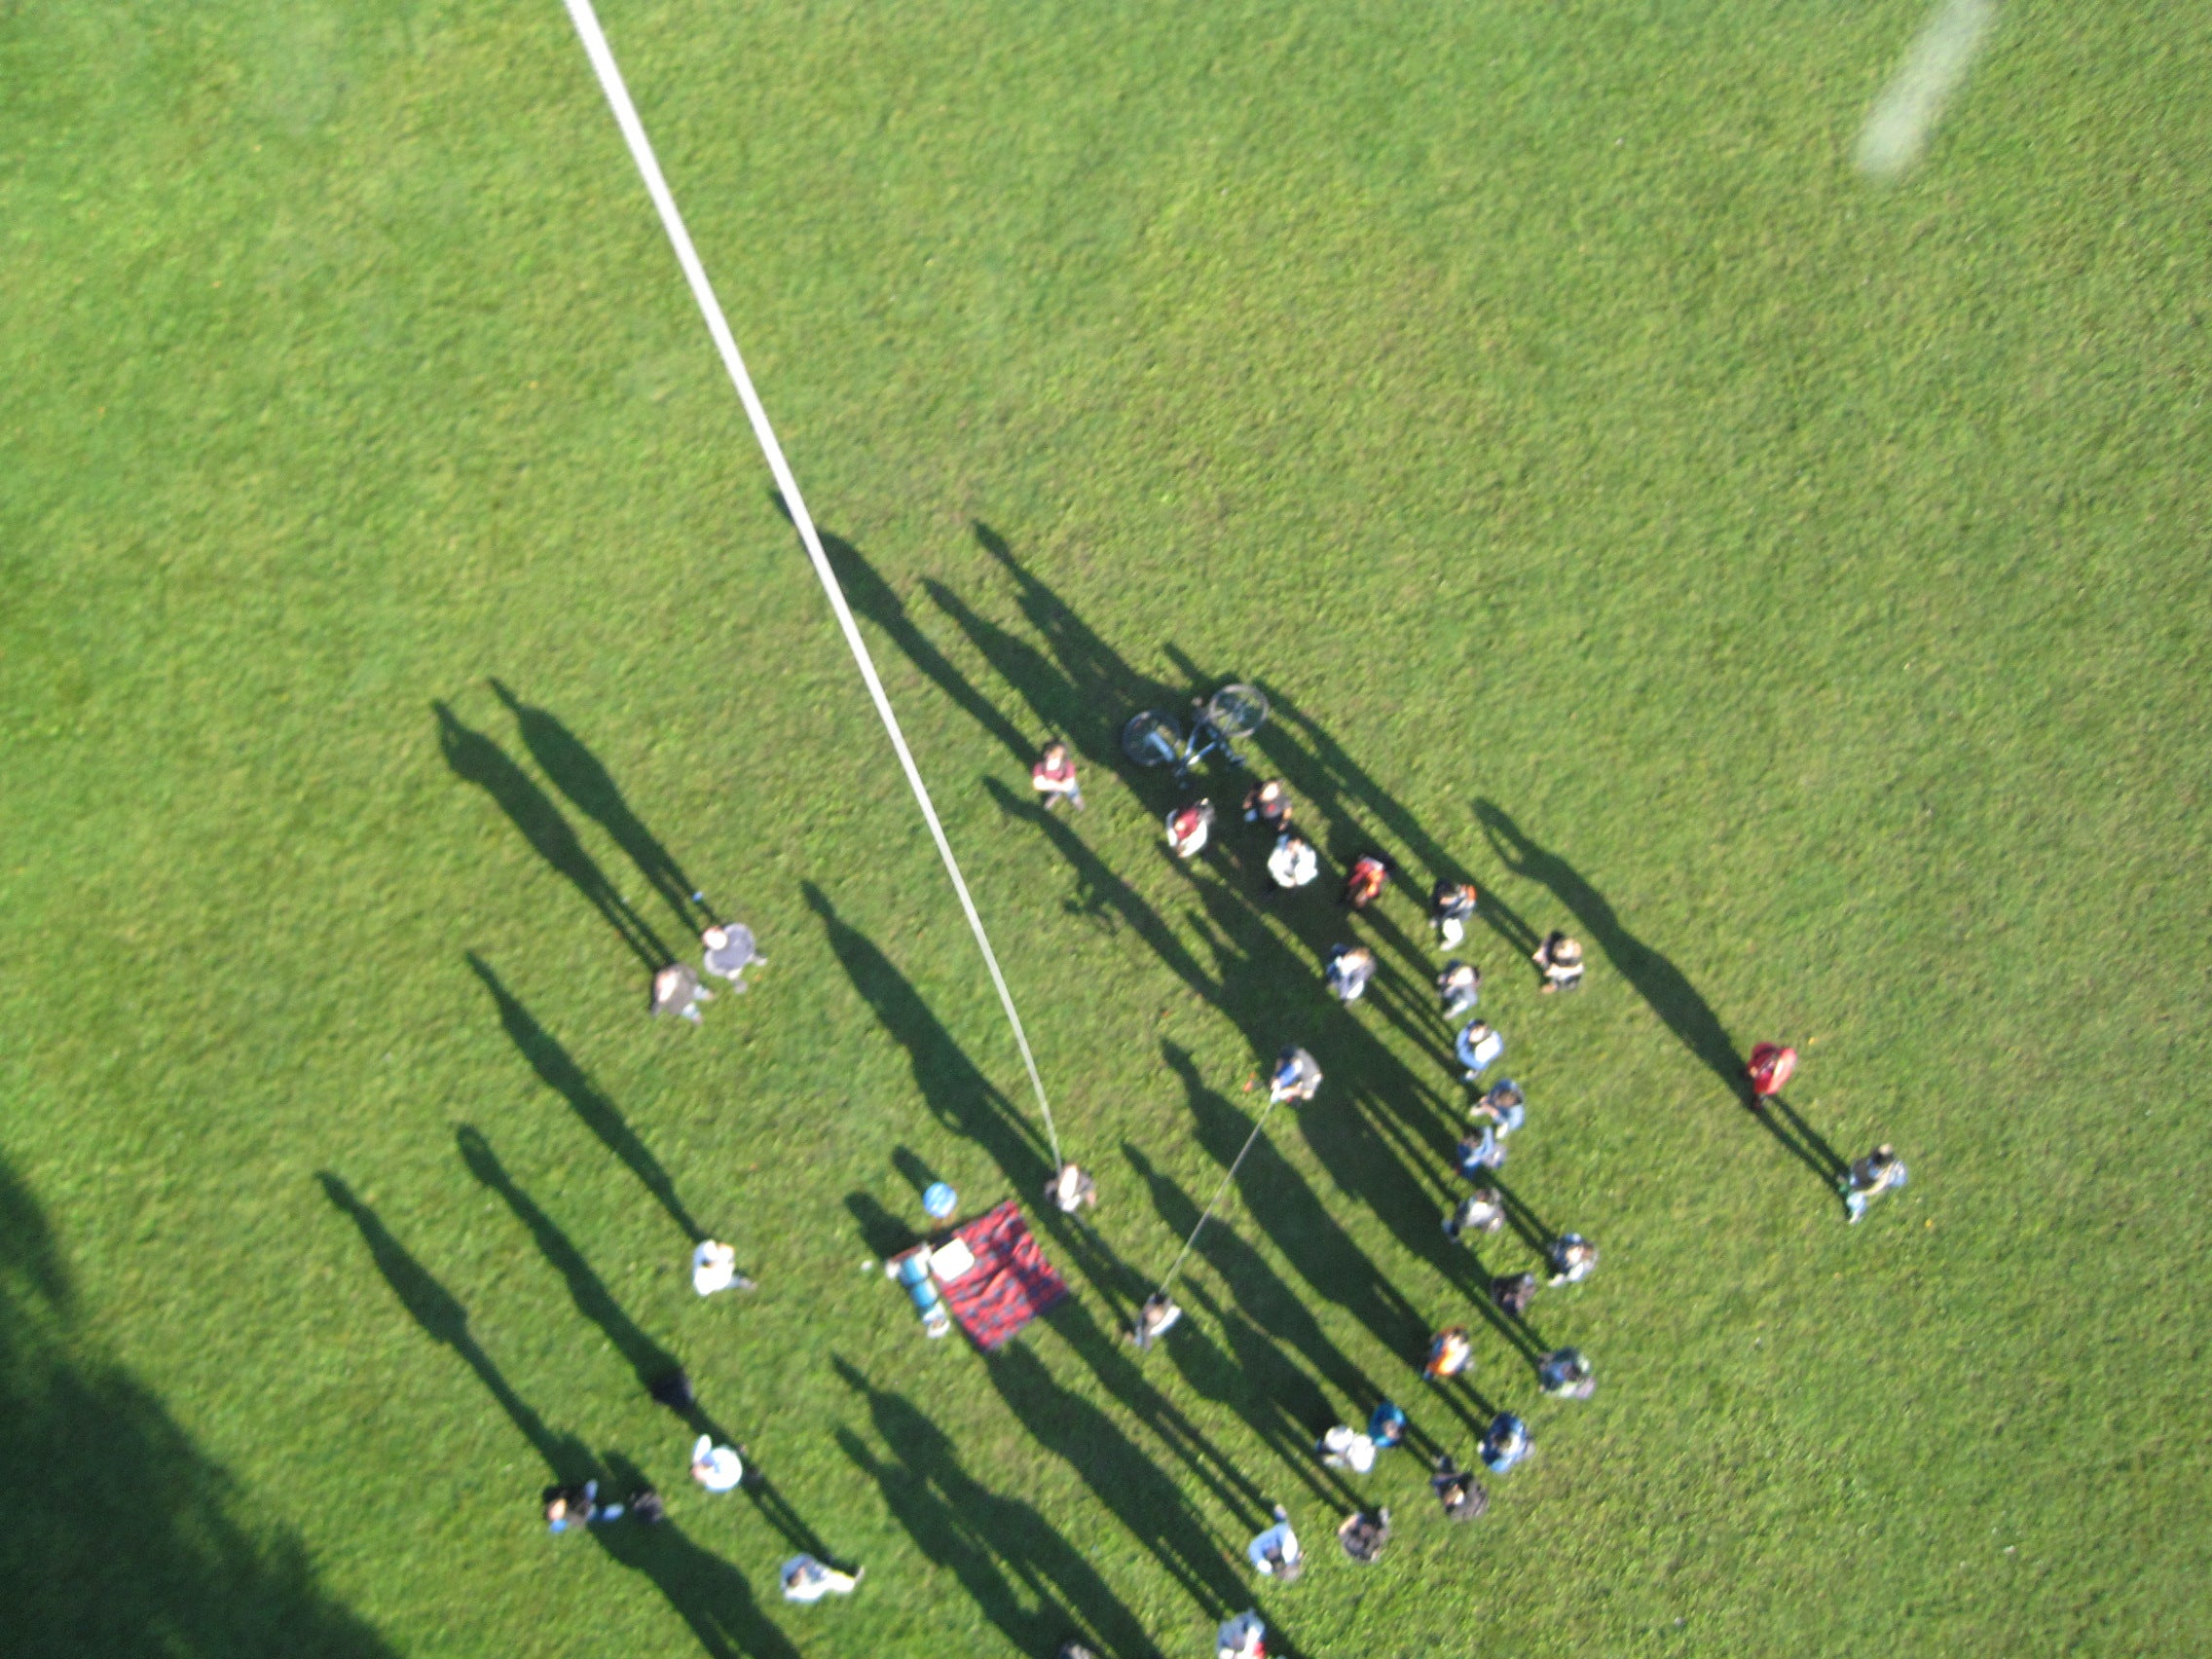 View from balloon – note the string tethering the balloon.